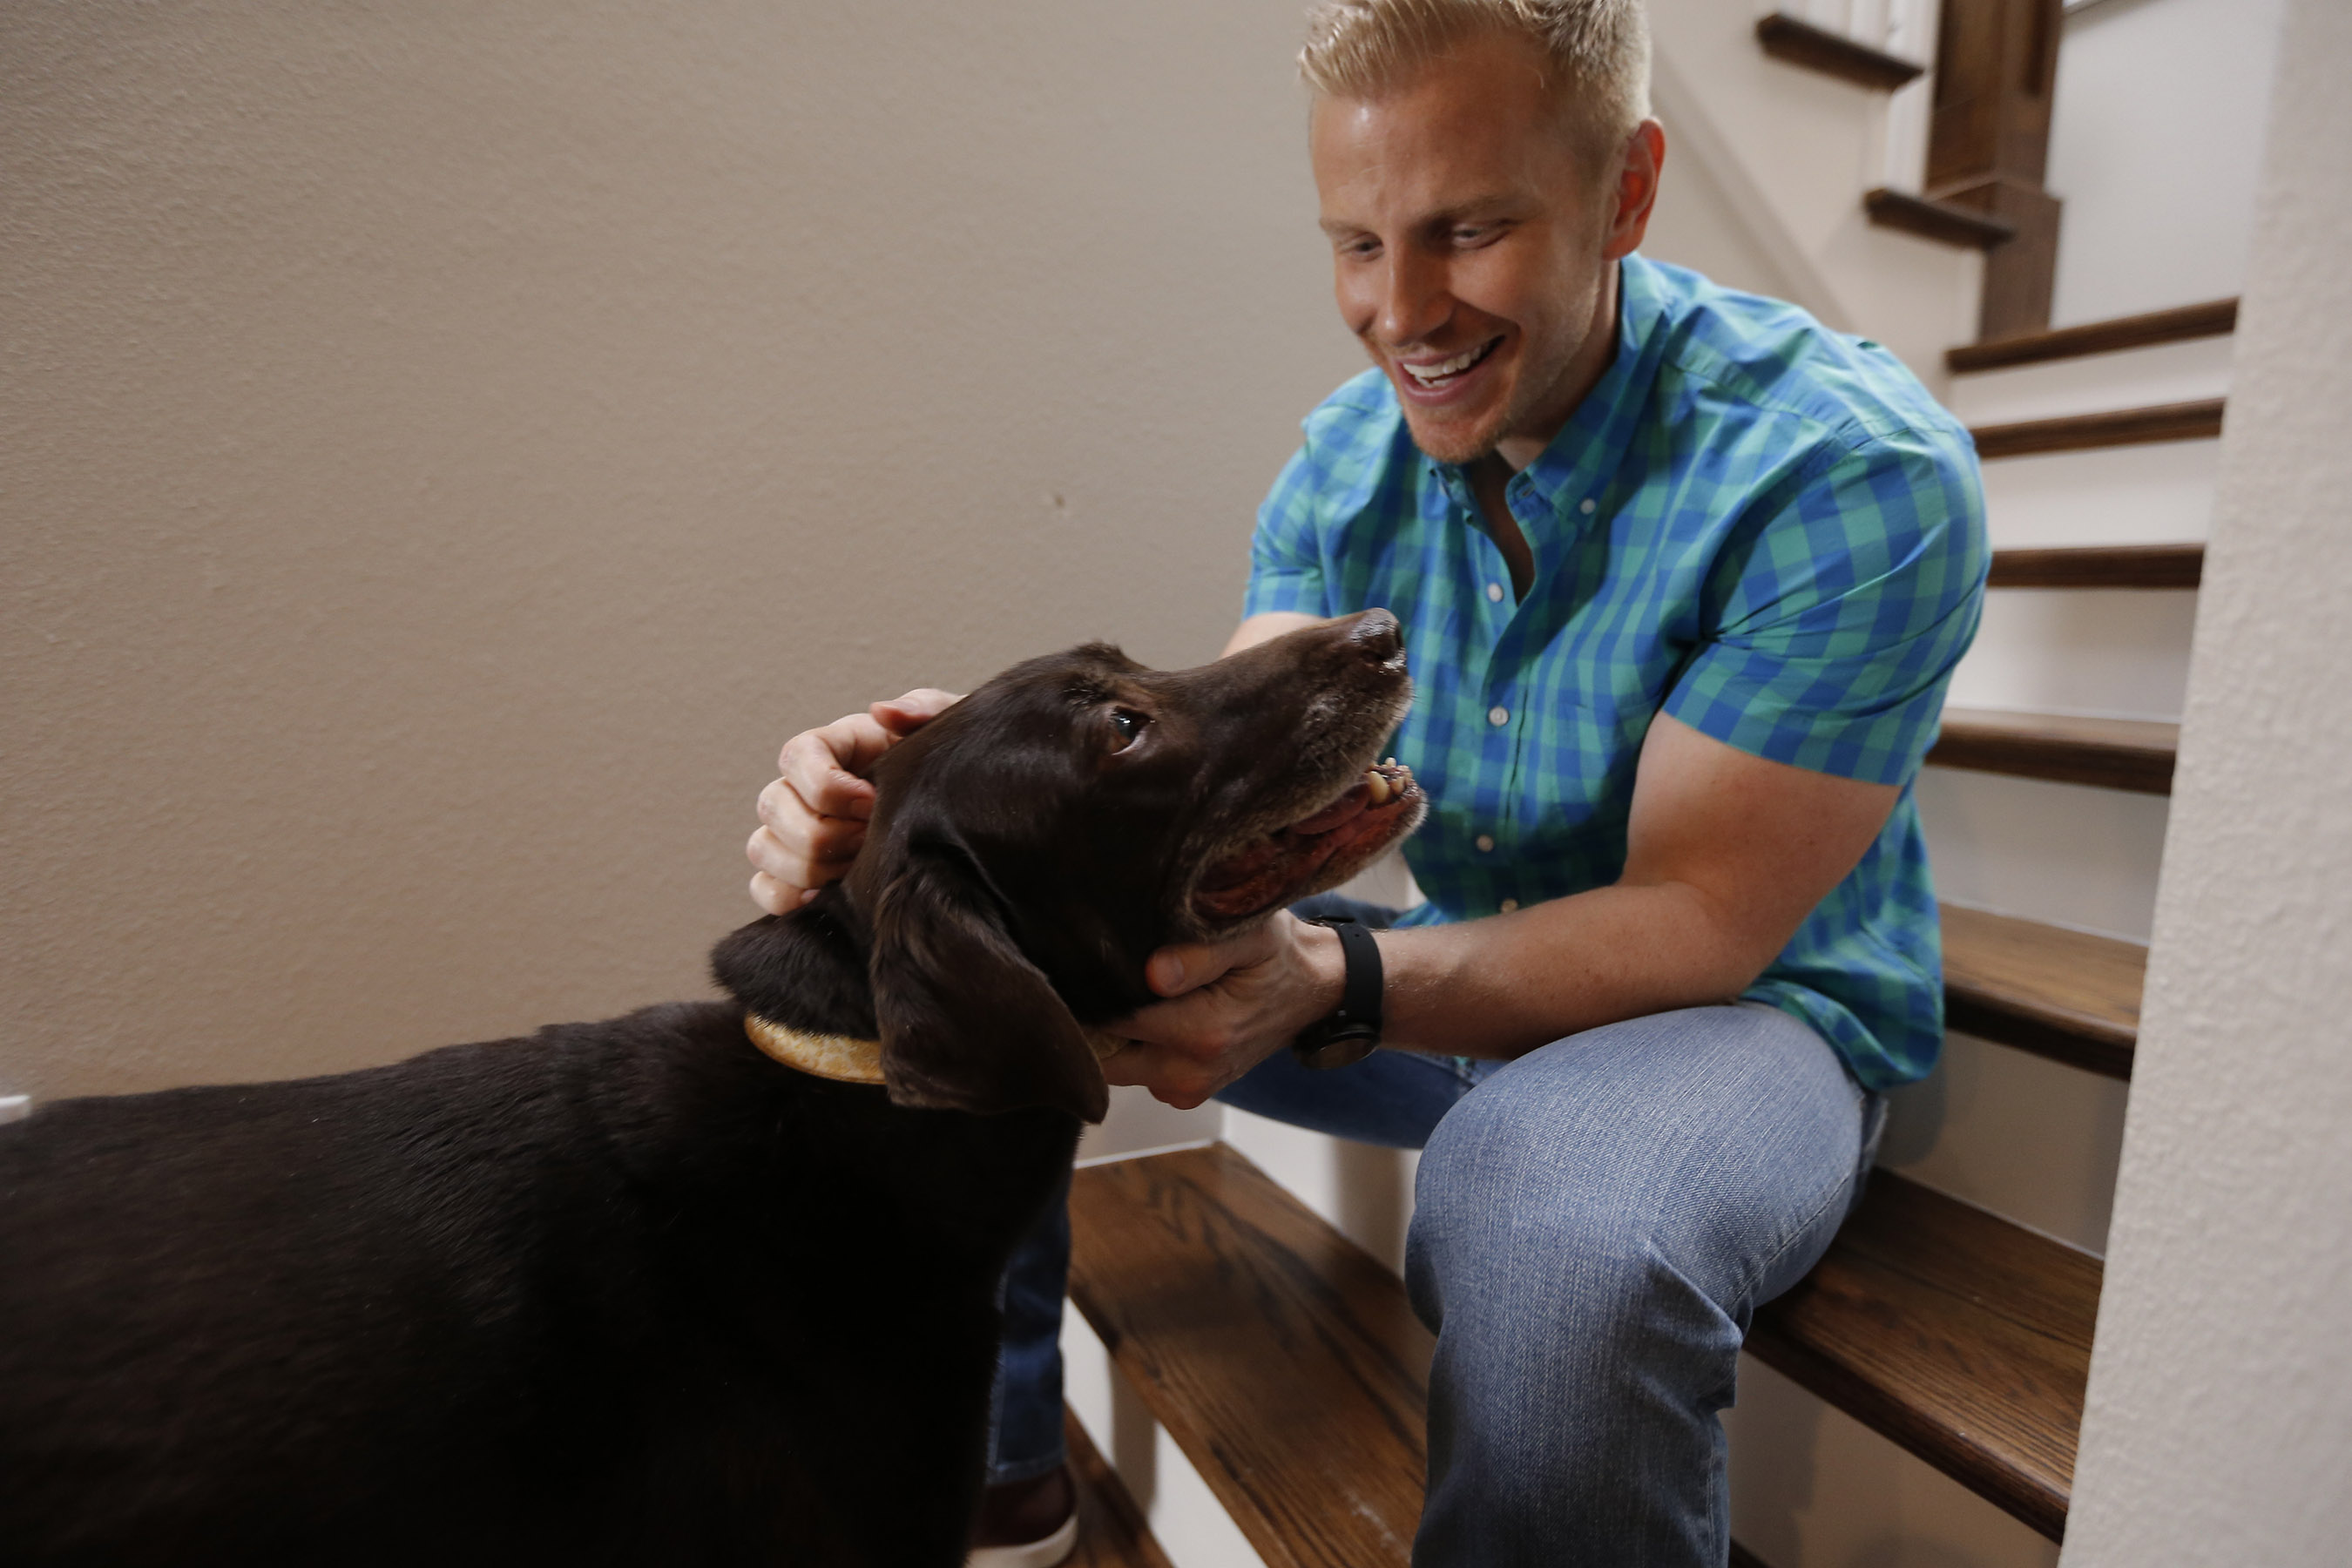 TV personality and Hurricane Harvey responder Sean Lowe shares a moment with his beloved dog, Ellie, while filming a pet disaster preparedness public service announcement (PSA) with the Banfield Foundation at his home in Dallas, Texas. The PSA debuted nationally on June 6, 2018 and educates pet owners on the importance of including pets in disaster planning. (Photo credit: Brandon Wade/AP Images for the Banfield Foundation)